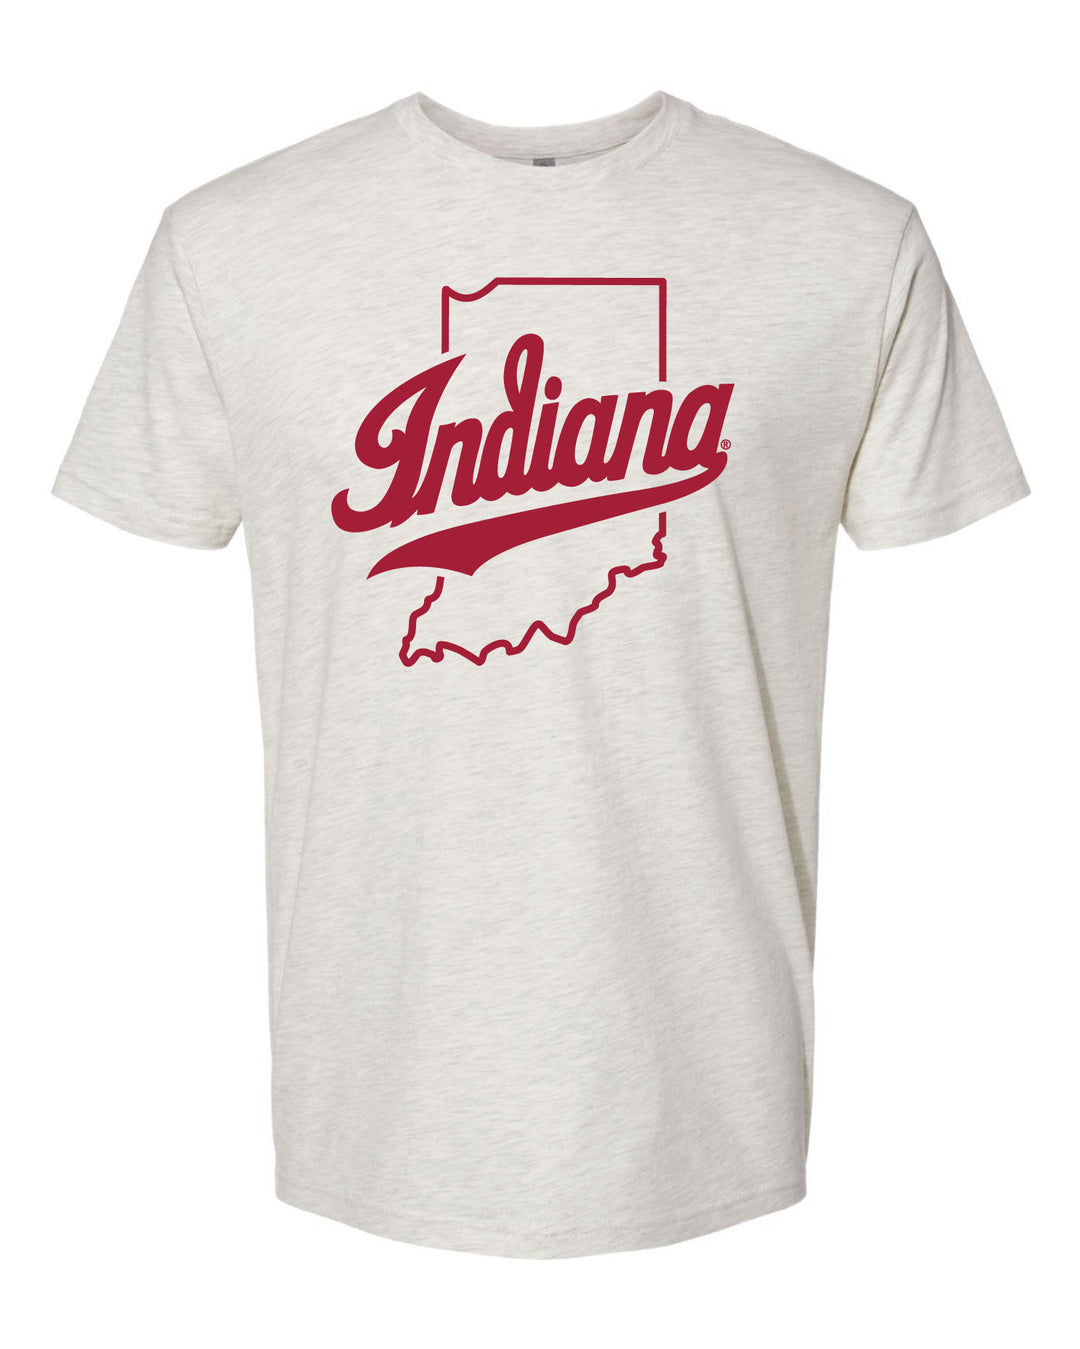 Indiana Script IU T Shirt for the Indiana Hoosiers from Nudge Printing